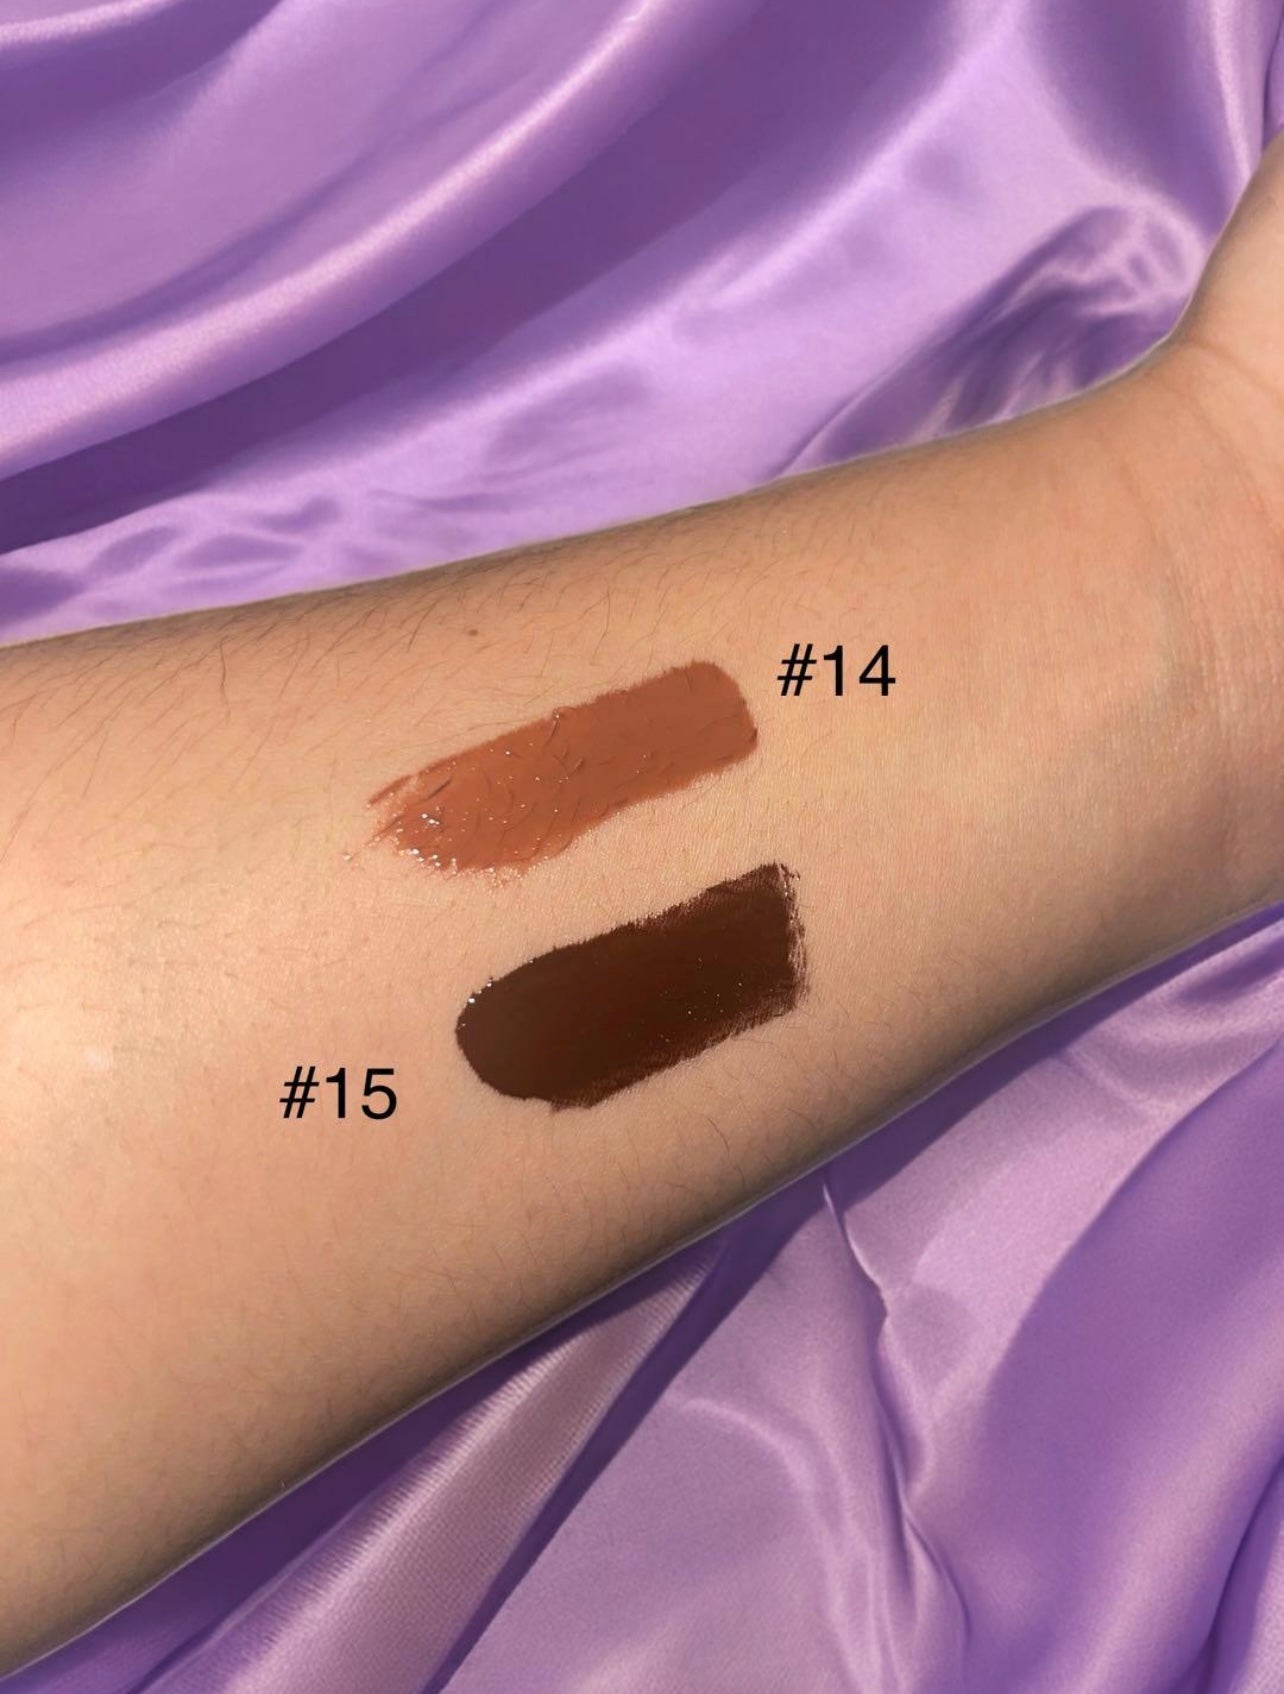 High-Shine Vegan Lip Gloss in variant of L#14 and L#15, providing a vibrant L#14 and L#15with a glossy shine